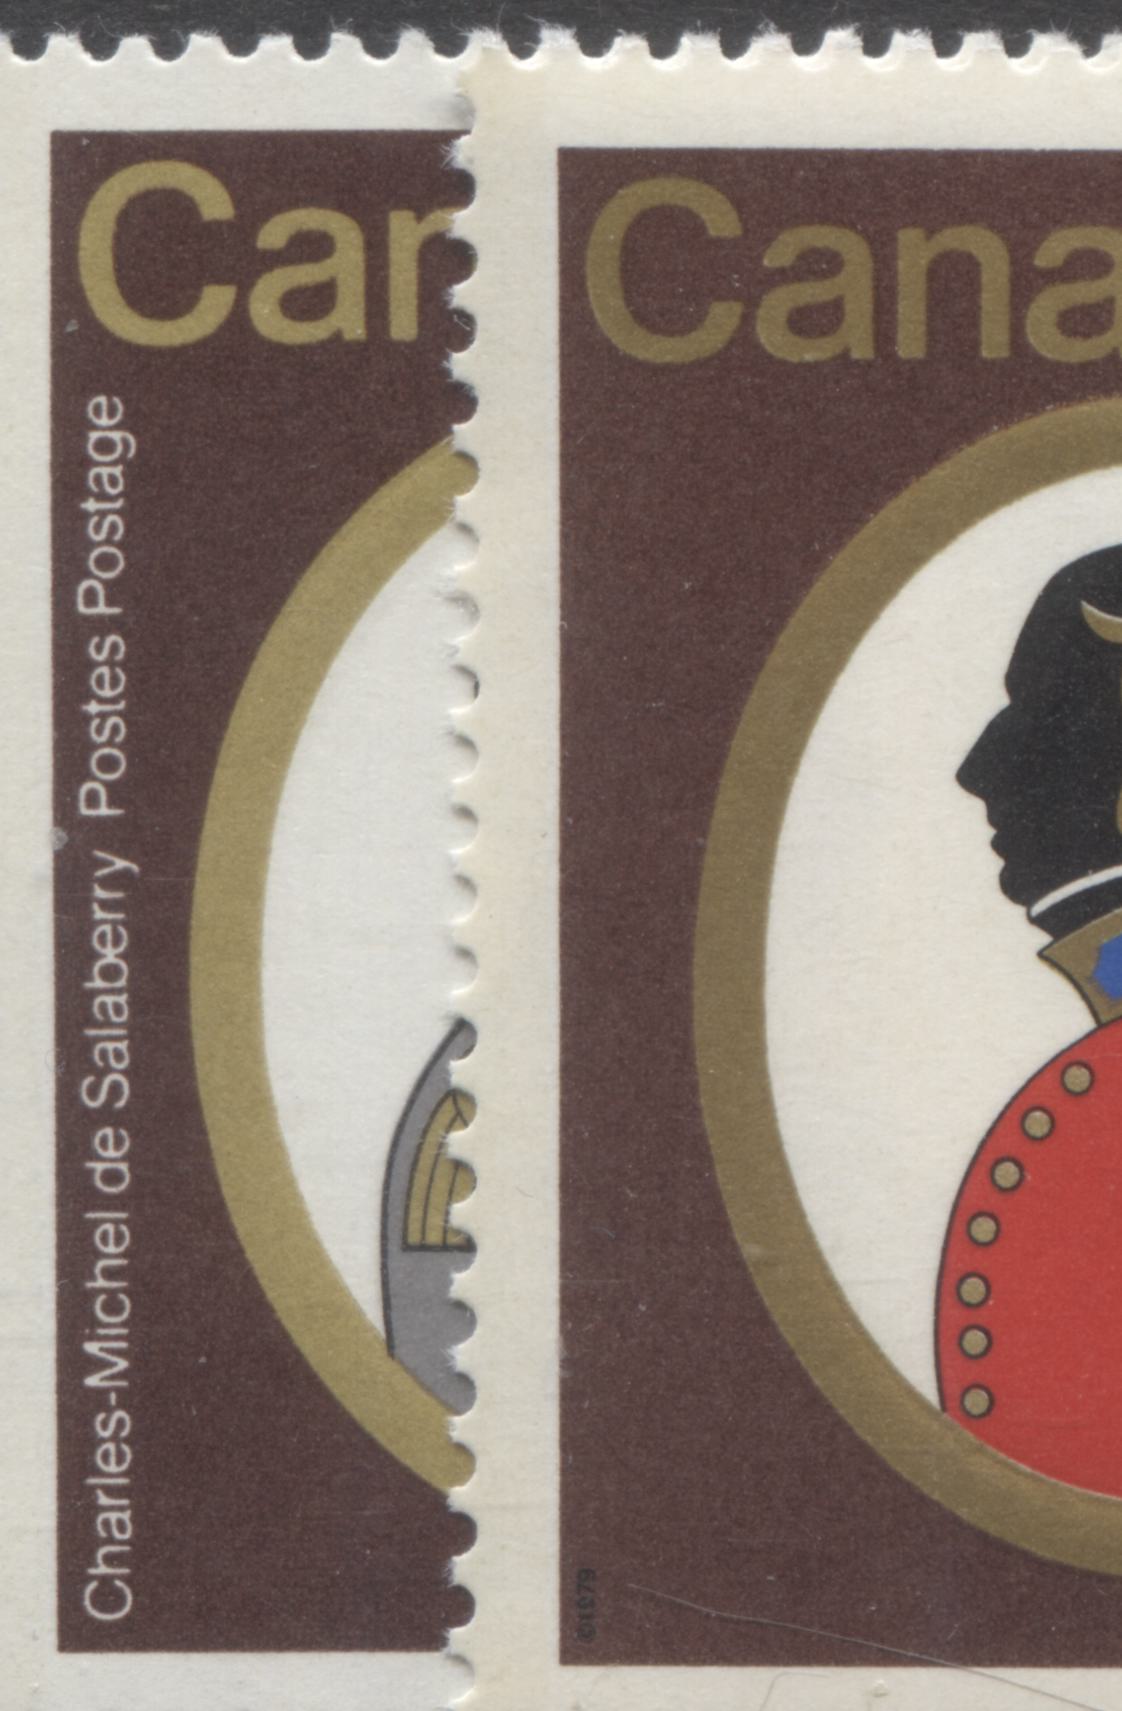 Lot 456 Canada #820avar 17c Multicolored Colonel C.M de Salaberry & Colonel John By, 1979 Canadian Colonels Issue, 2 VFNH Pairs With Yellow Gold Instead Of Normal Deep Gold & Fluorescent Ink On John By's Uniform, Normal For Comparison